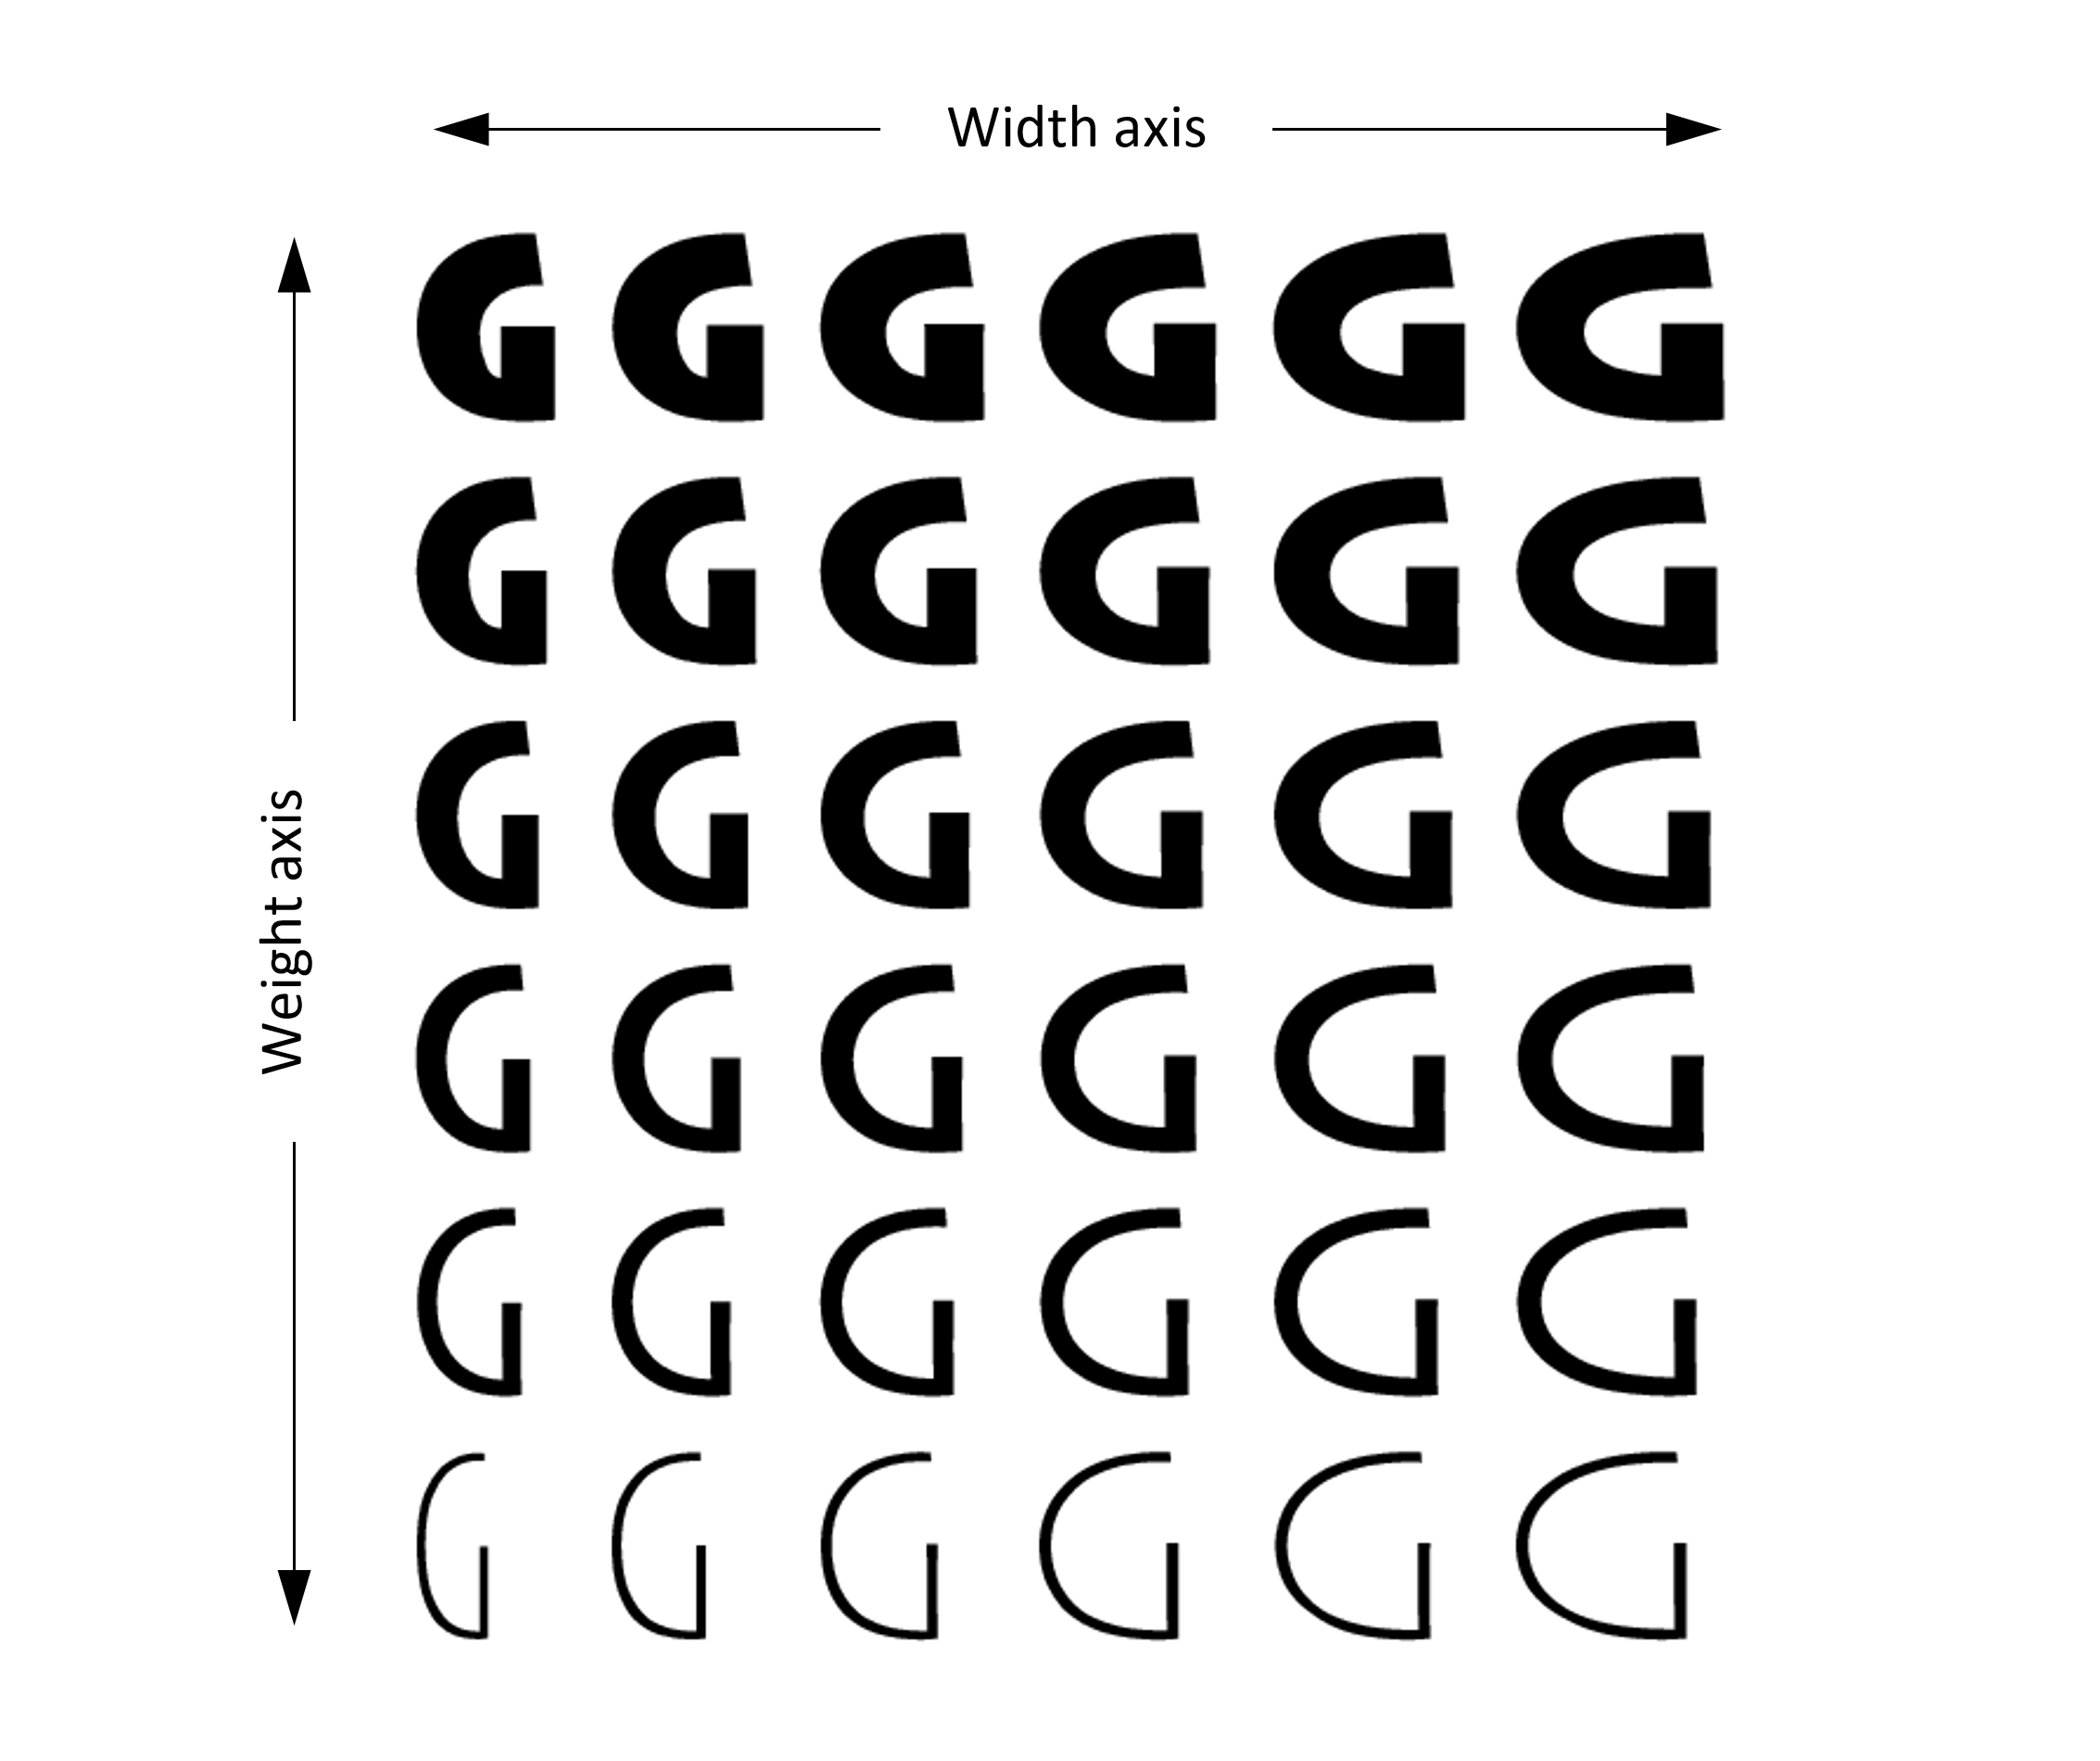 Variations of capital G in a design space with weight and width axes